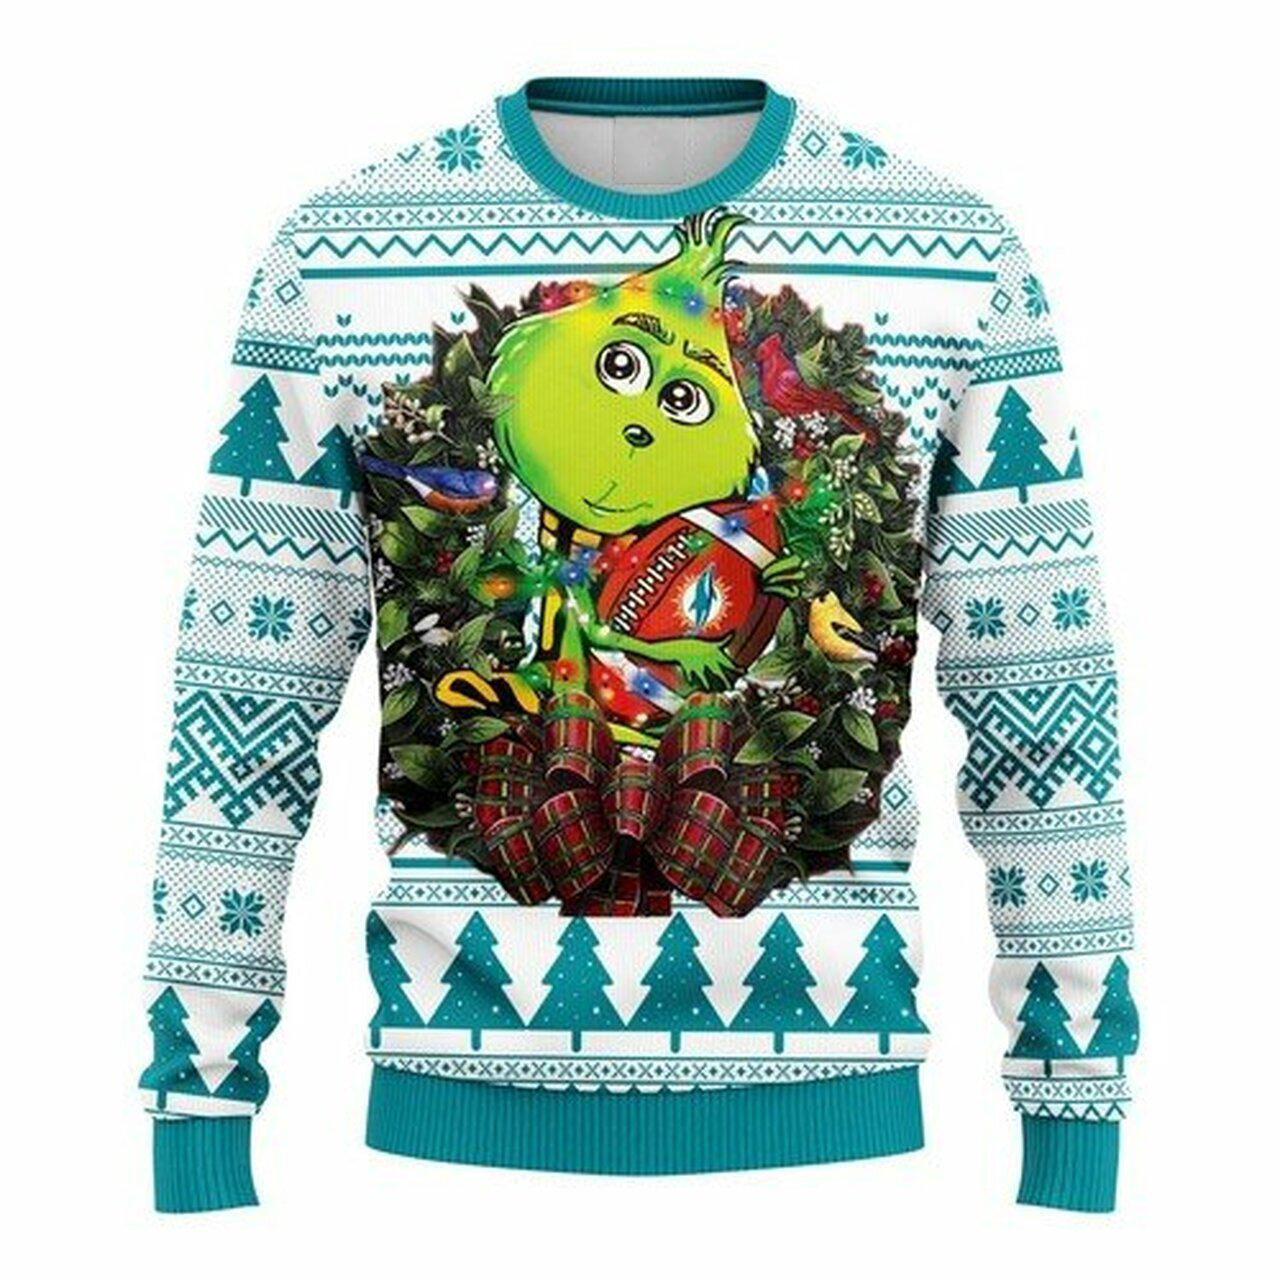 [ HOT ] NFL Miami Dolphins Grinch hug ugly christmas sweater – Saleoff 030122